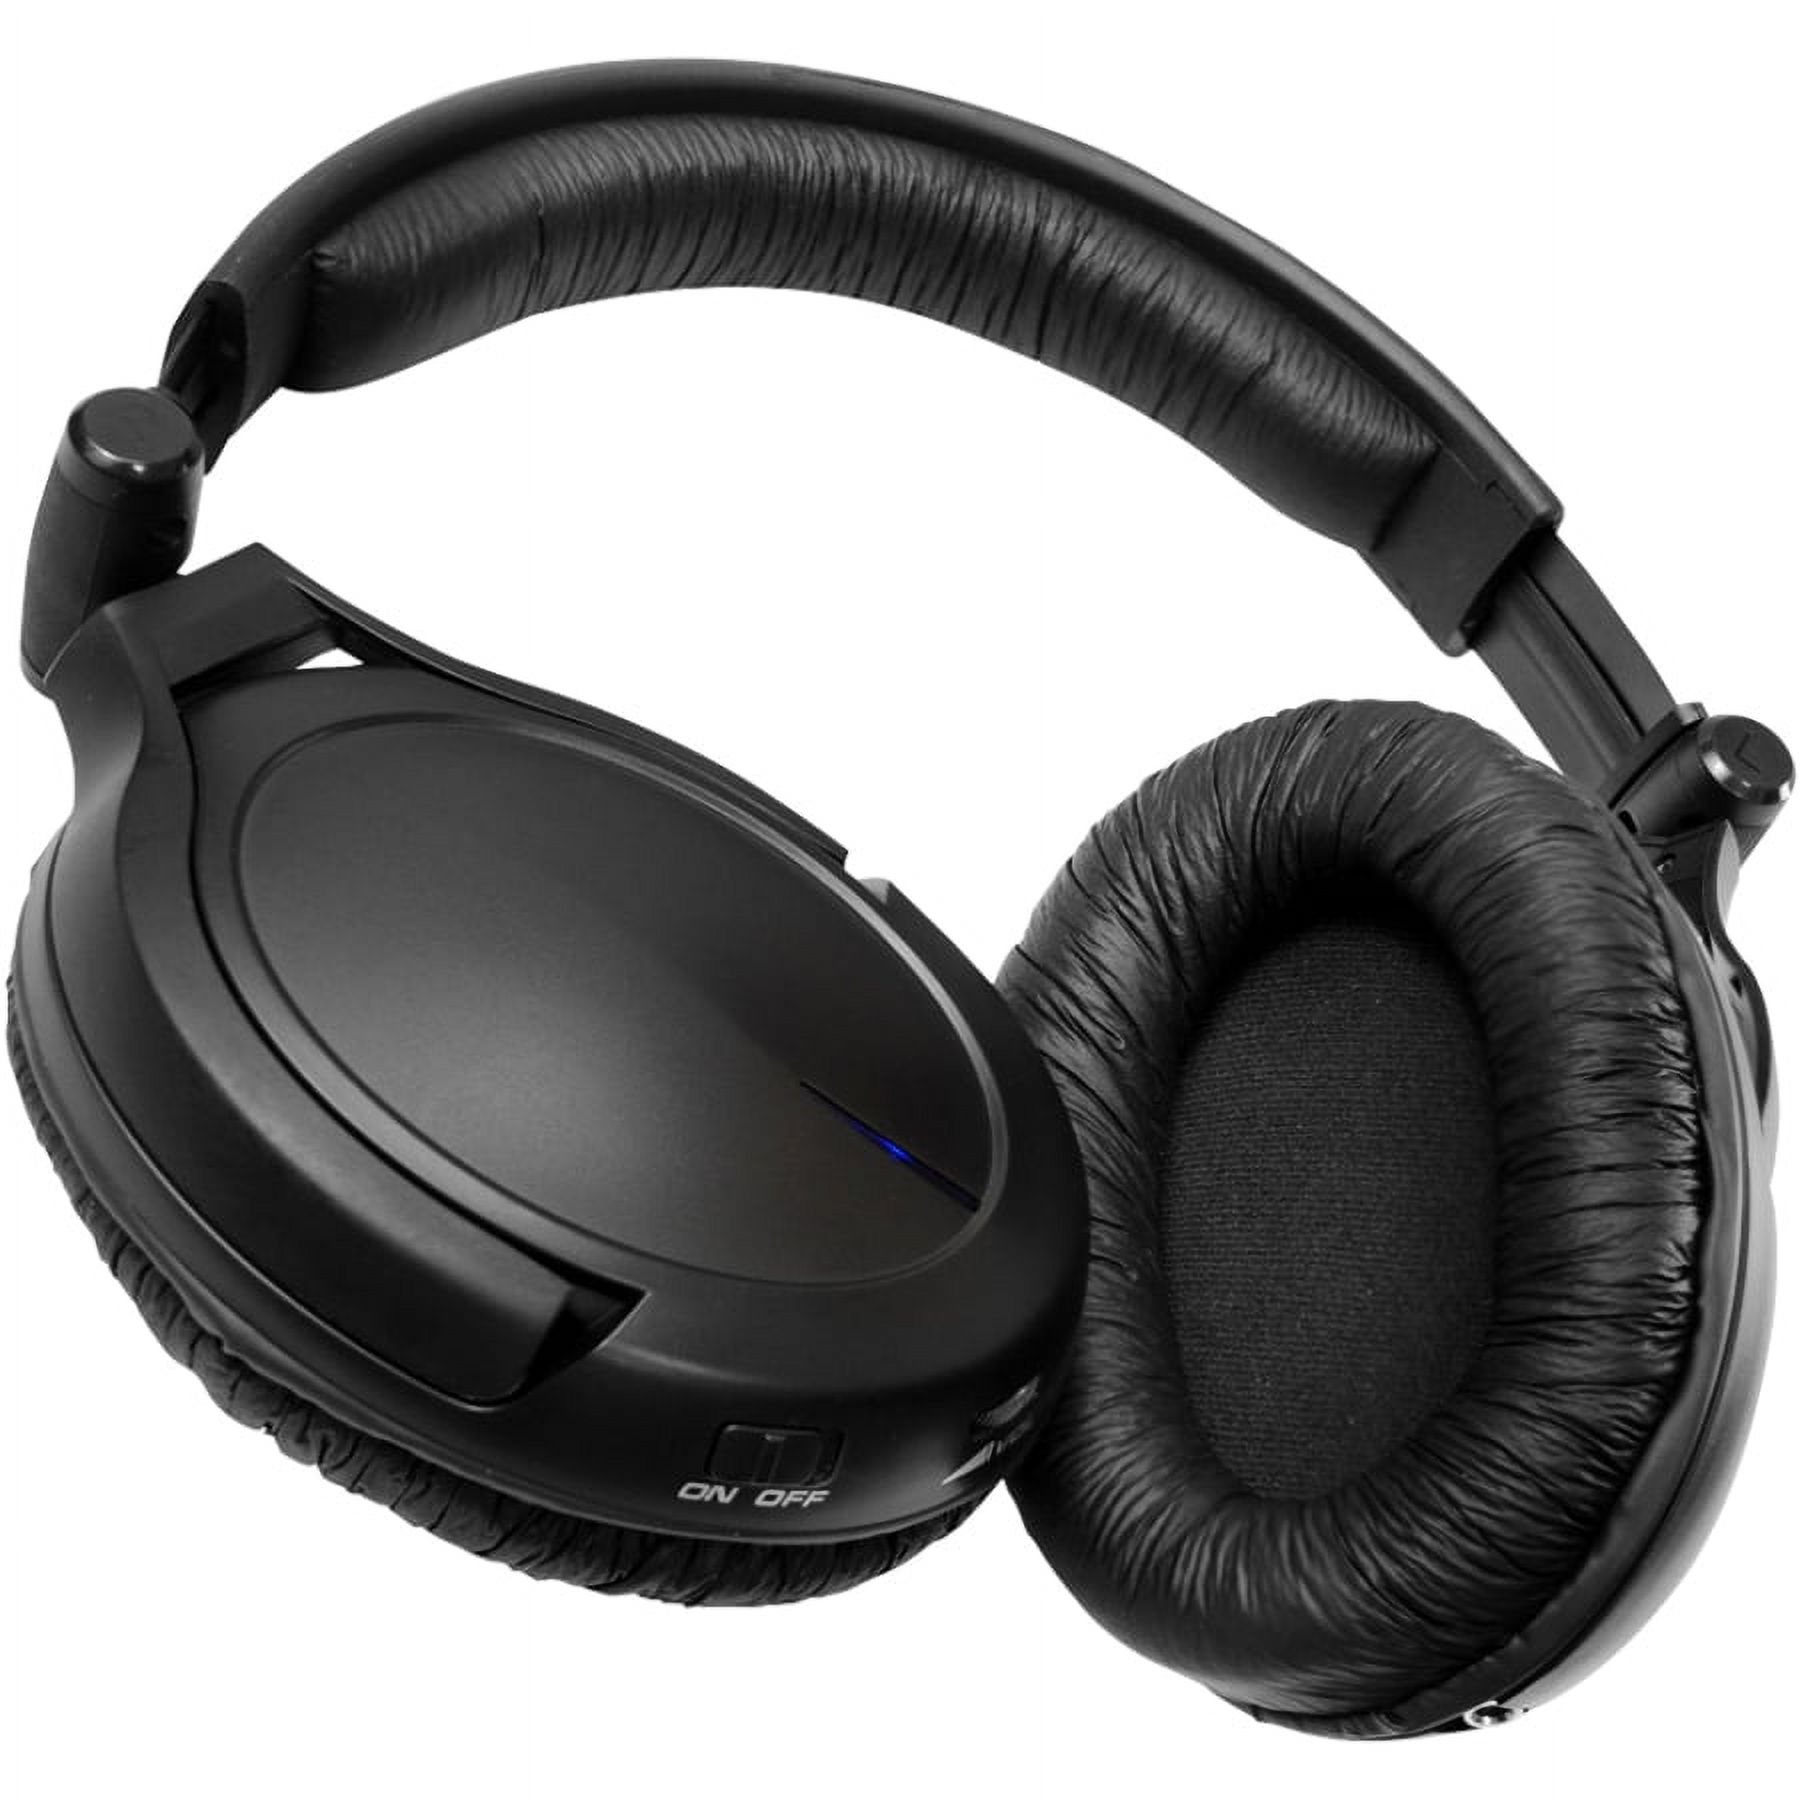 High-Fidelity Noise-Canceling Headphones With Carrying Case - image 2 of 6